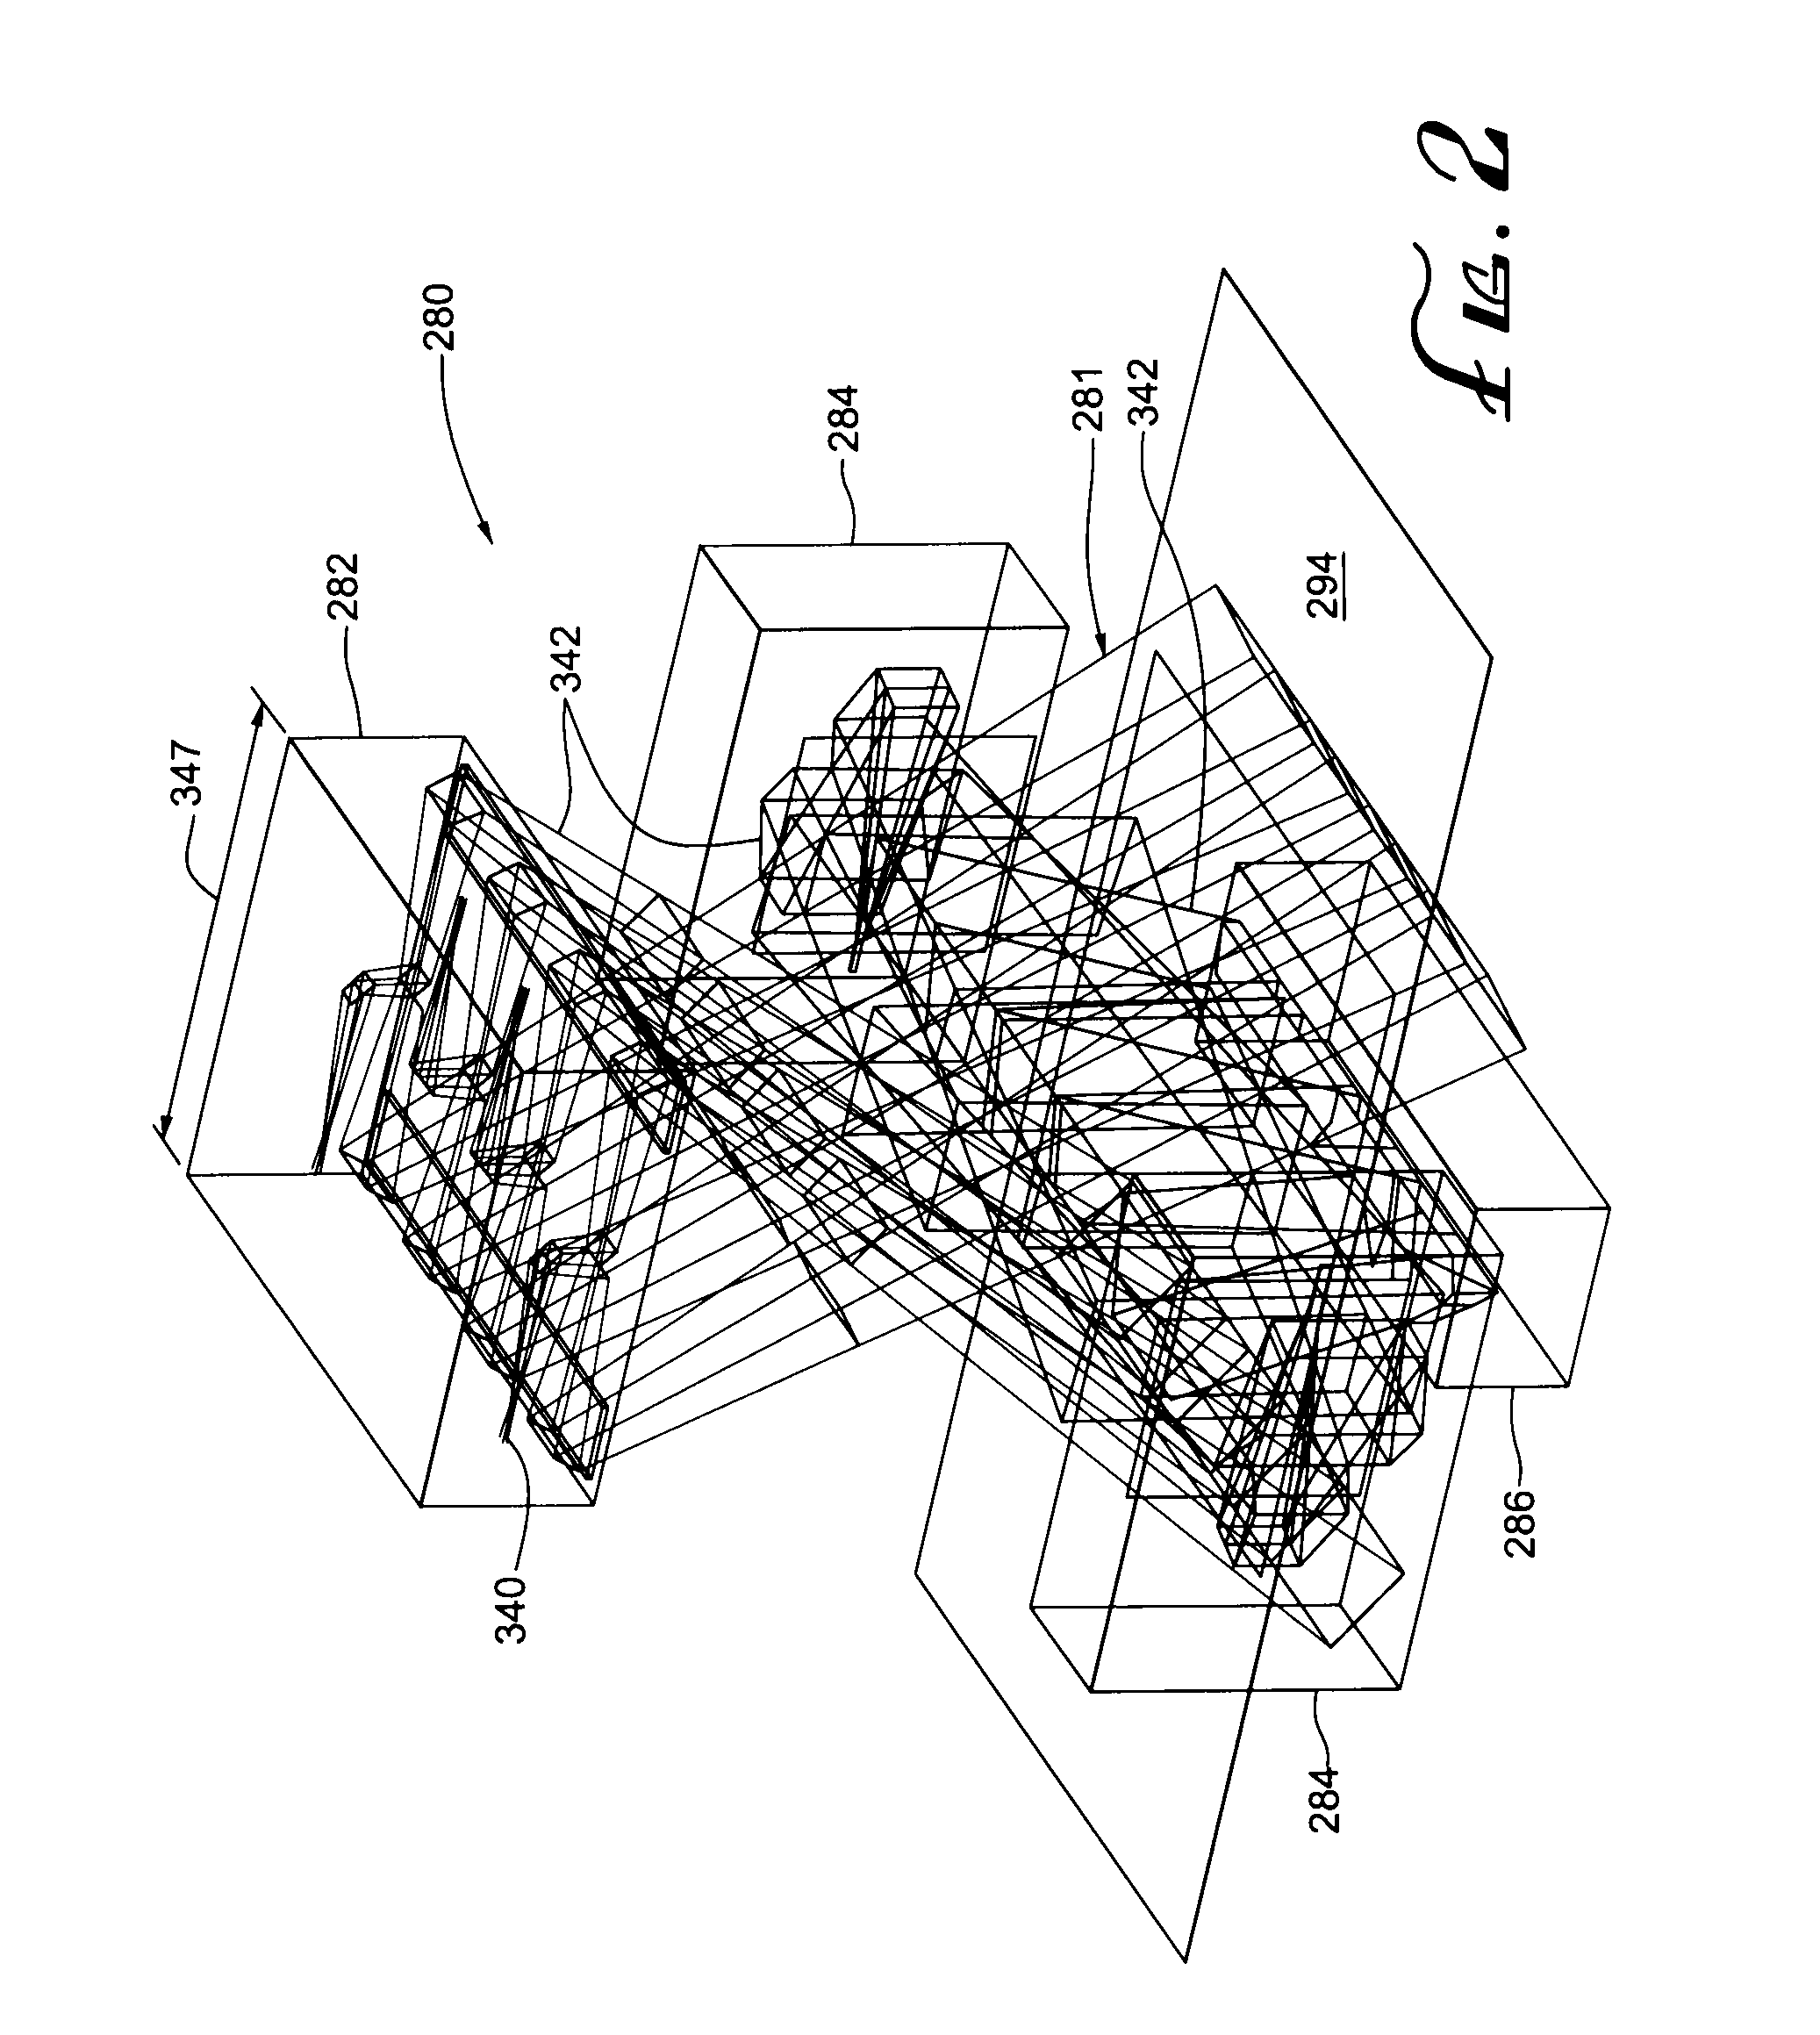 Image-based code reader for acquisition of multiple views of an object and methods for employing same